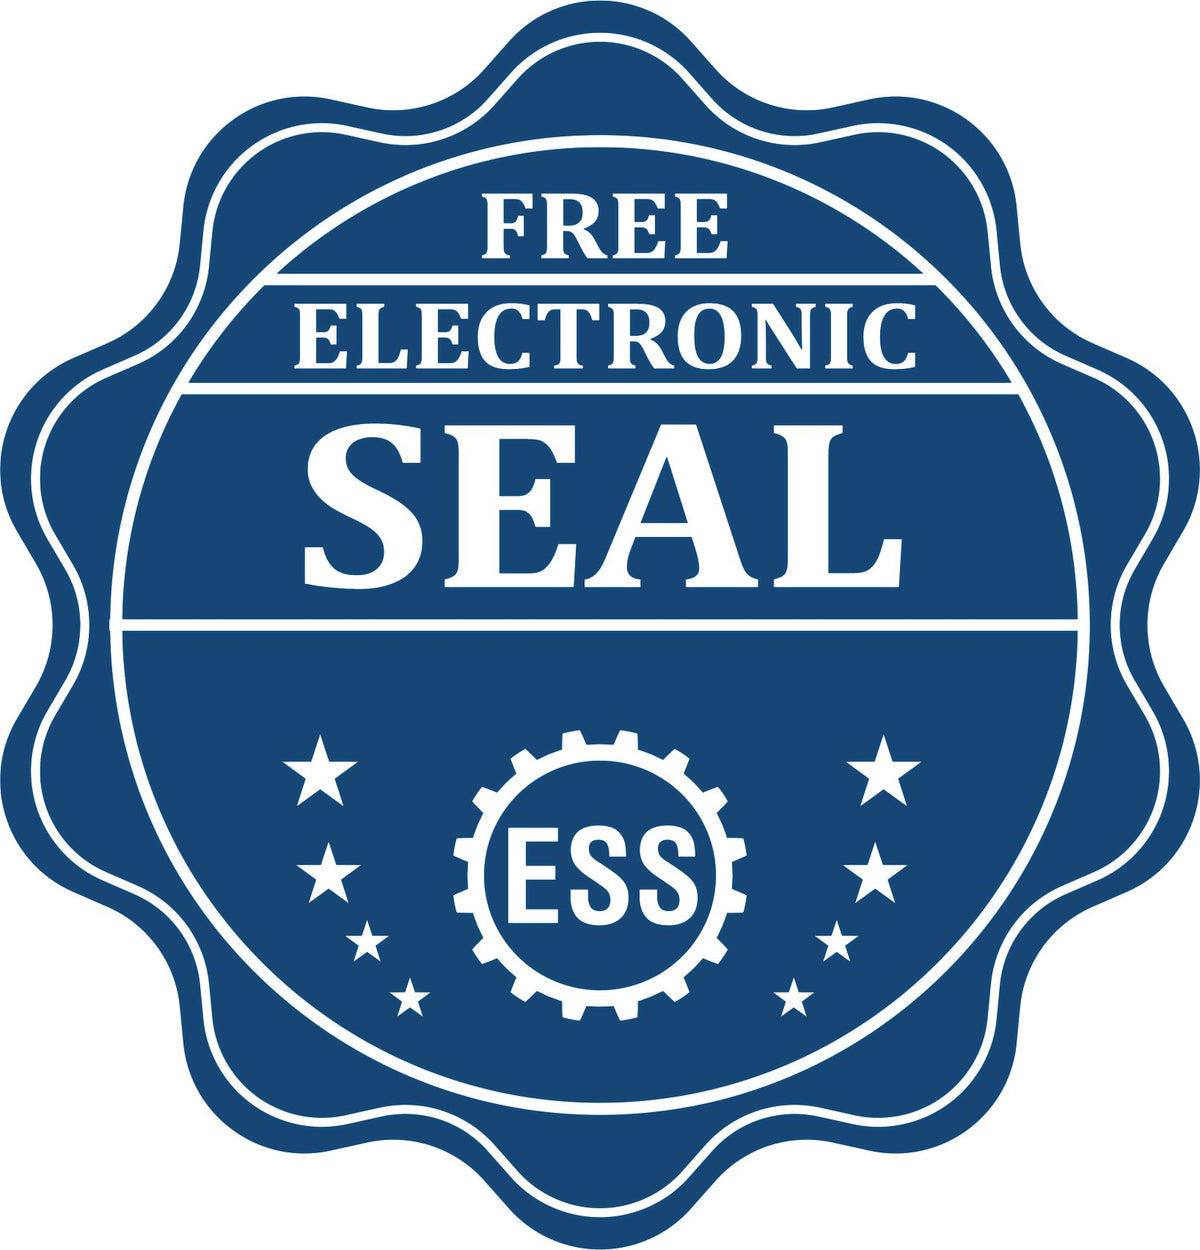 A badge showing a free electronic seal for the Premium MaxLight Pre-Inked North Dakota Geology Stamp with stars and the ESS gear on the emblem.